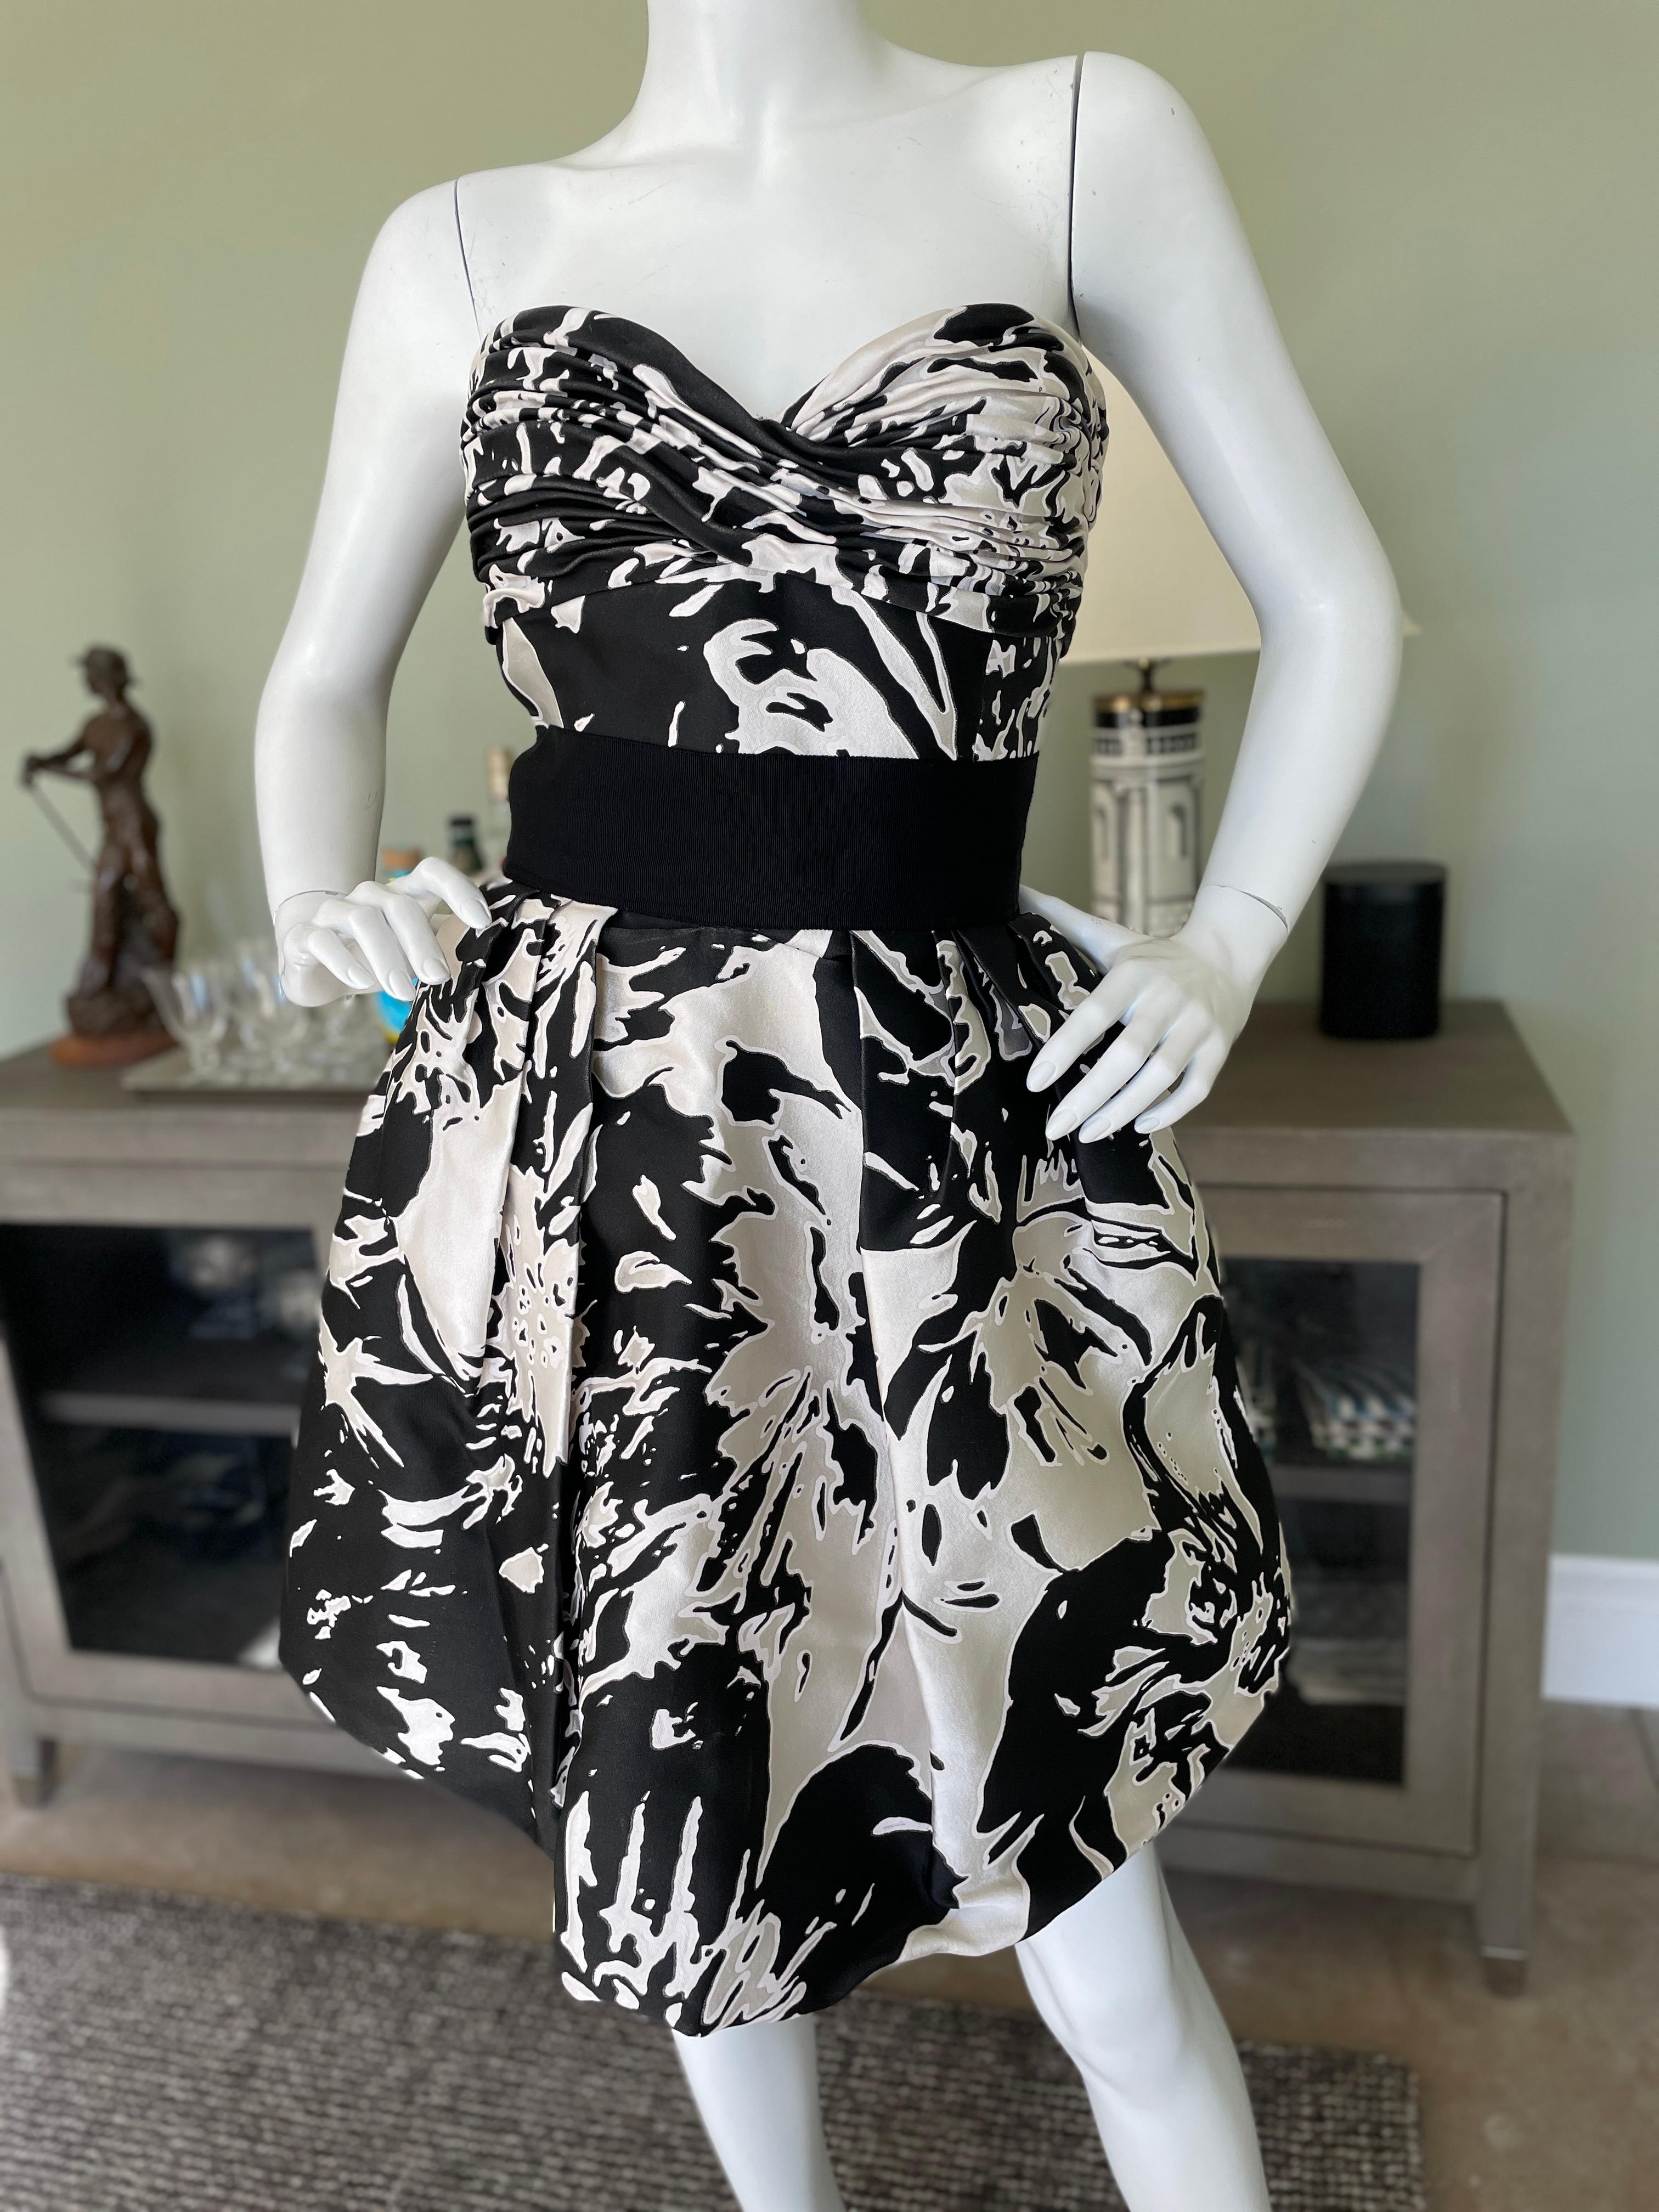 Oscar de la Renta Black and White Strapless Mini Ball Gown.
Fall 2010, there is a full inner corset.
Size label removed I would estimate size 10-12
Bust 38